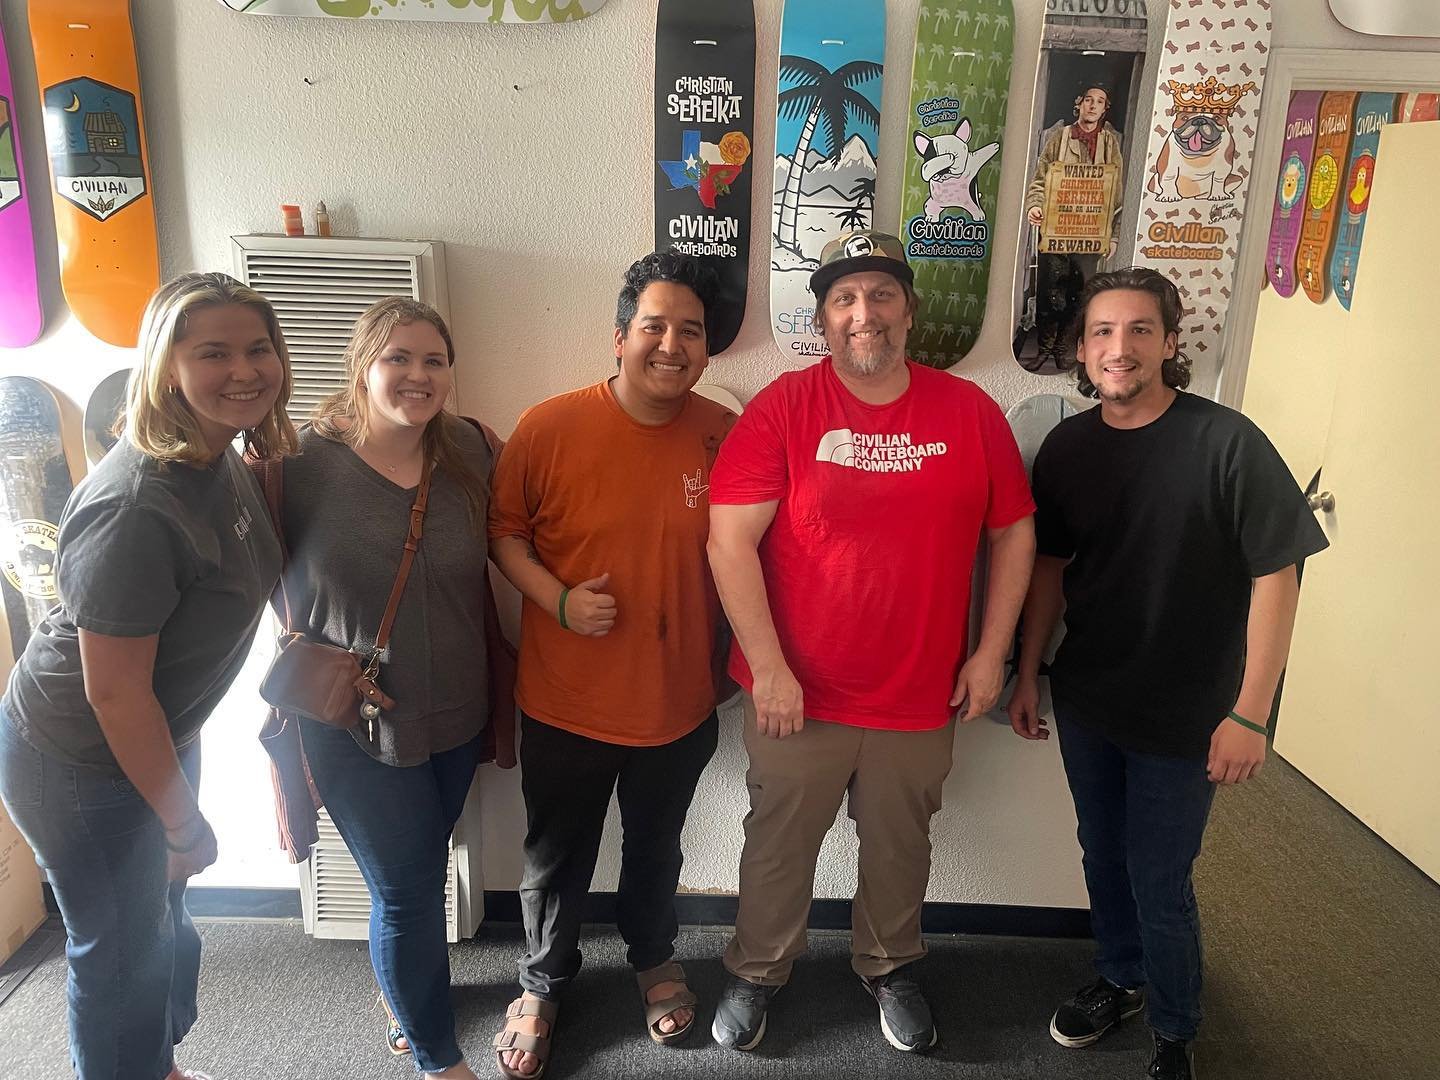 Huge shoutout and Thank you to Civilian Skateboards for teaming up with us to help bless the kids in Mexico!!! With Jeff&rsquo;s amazing business, we are able to bring 40 new complete skateboards to the Kiddos!! Praise the Lord!!!